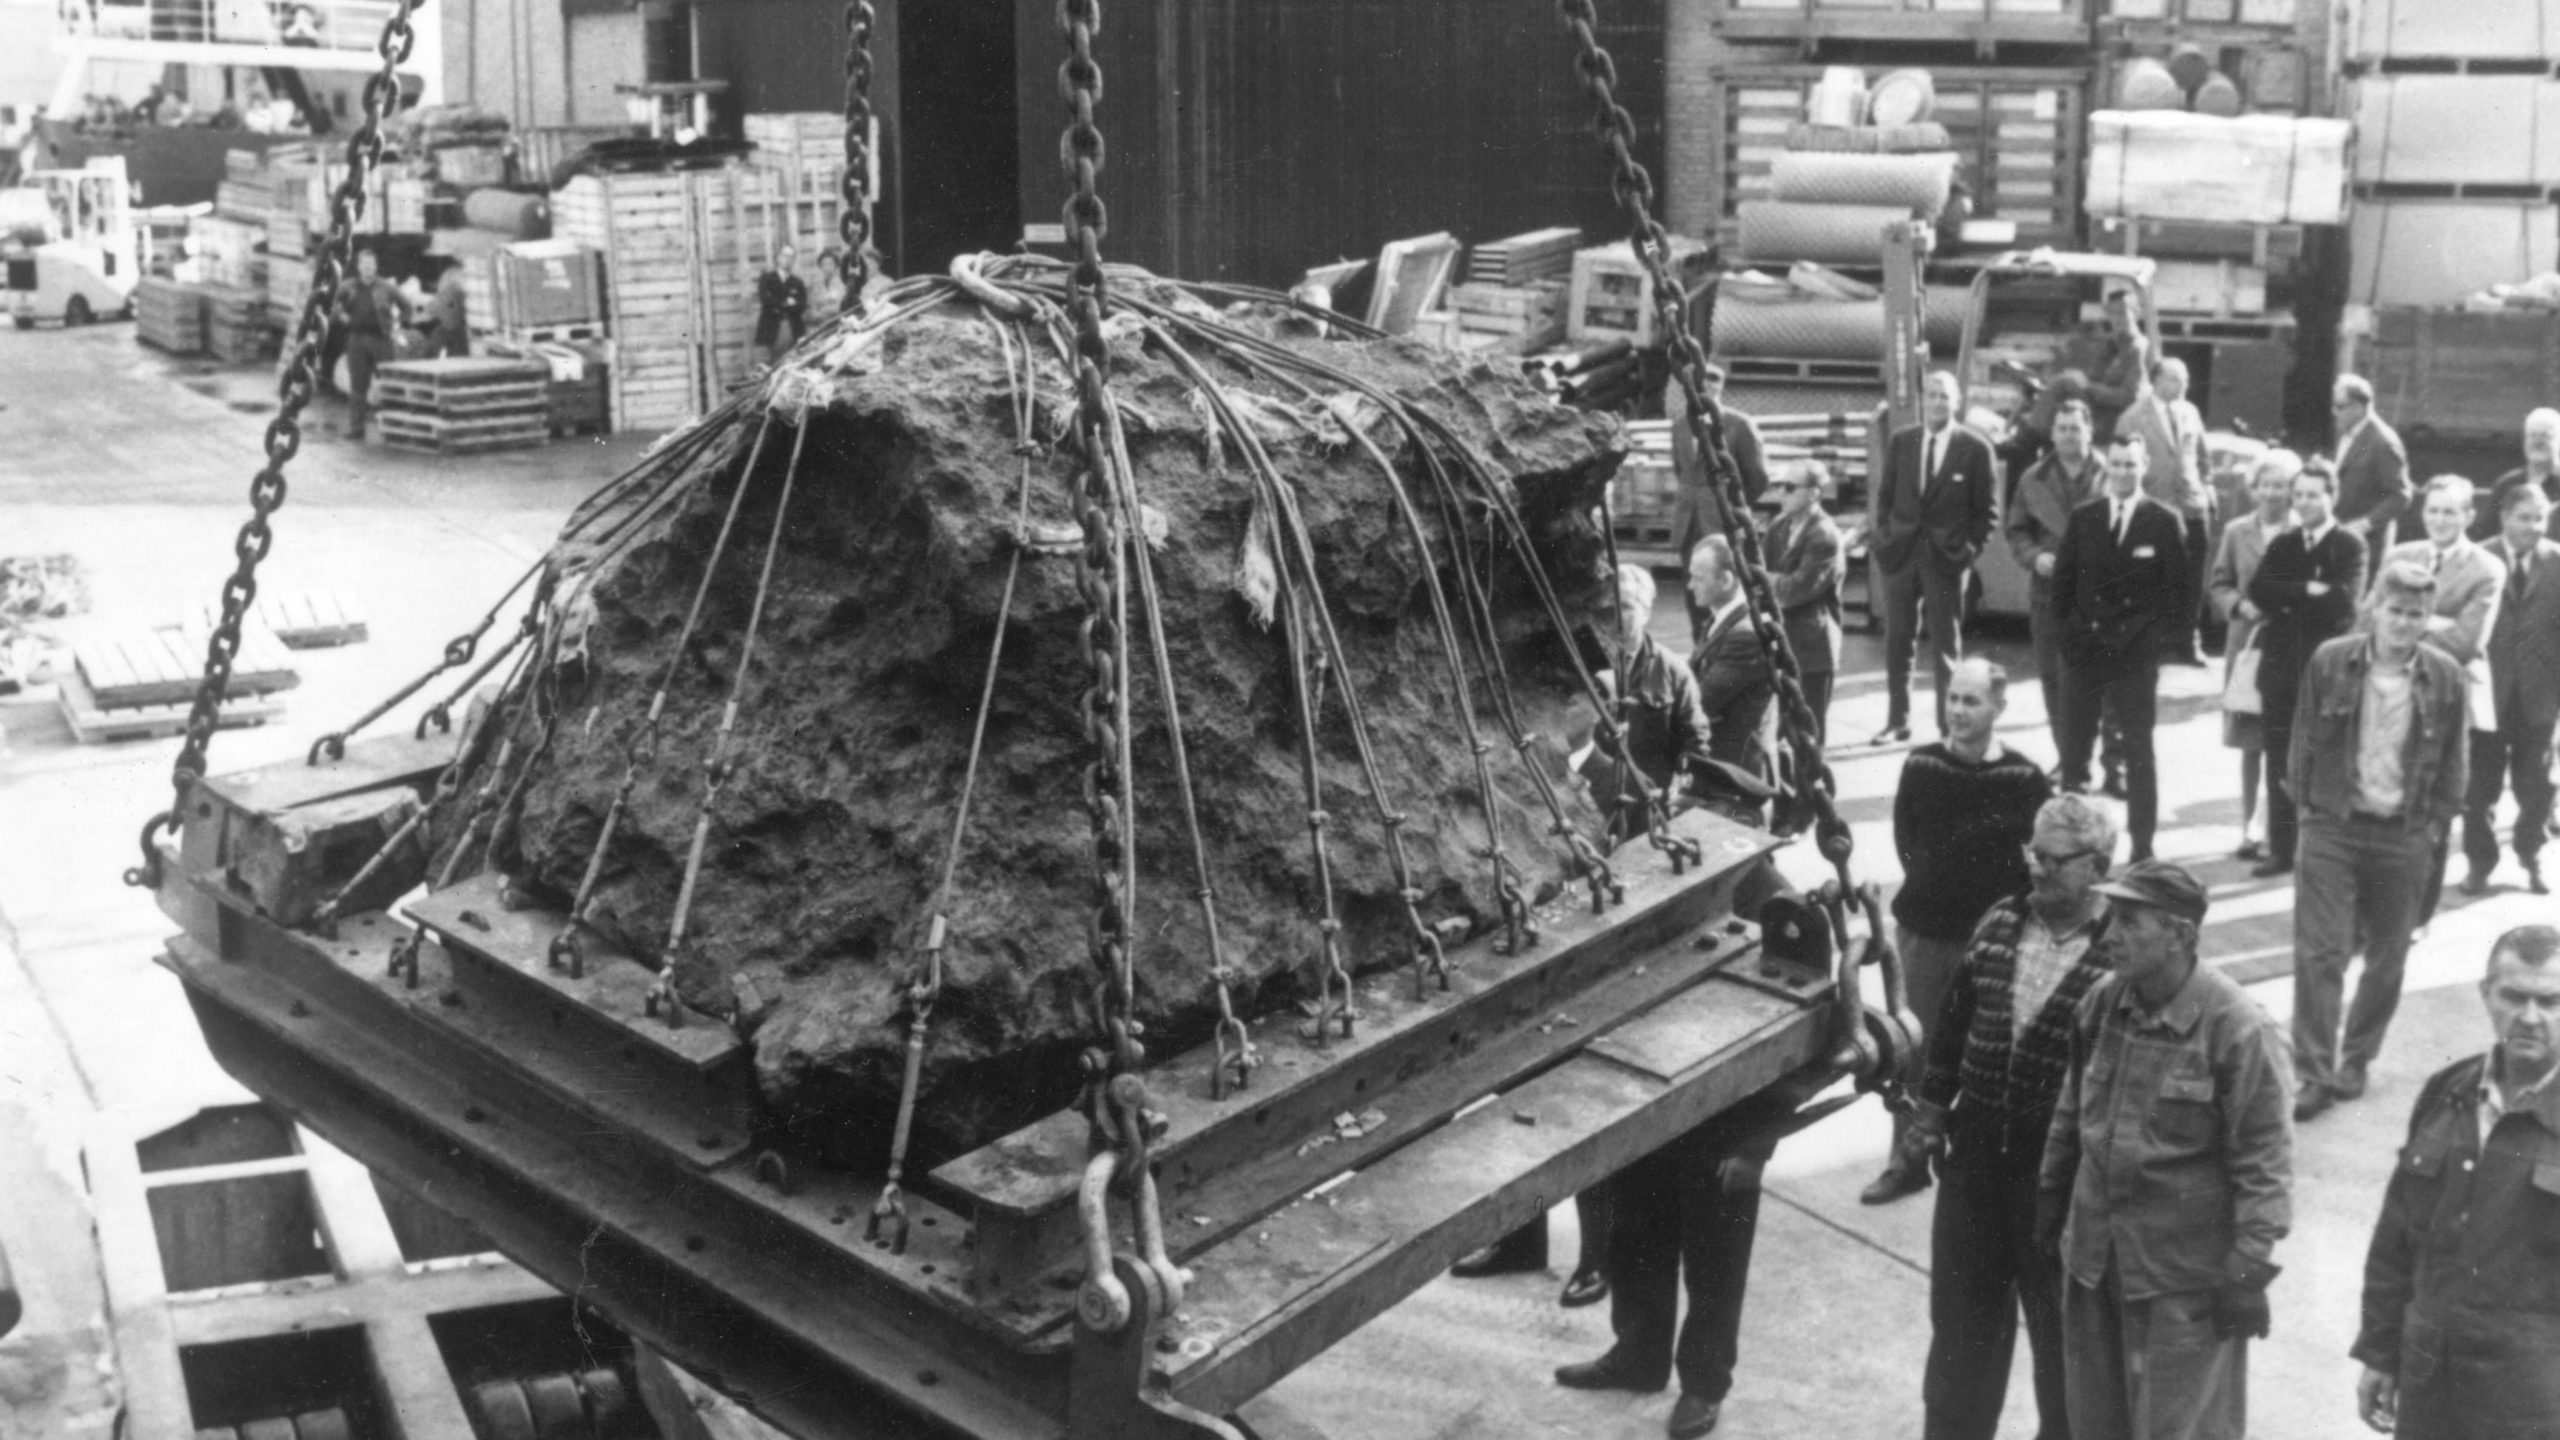 A huge iron meteorite found in Greenland in 1963. (Photo: Photo by Keystone/Getty Images, Getty Images)